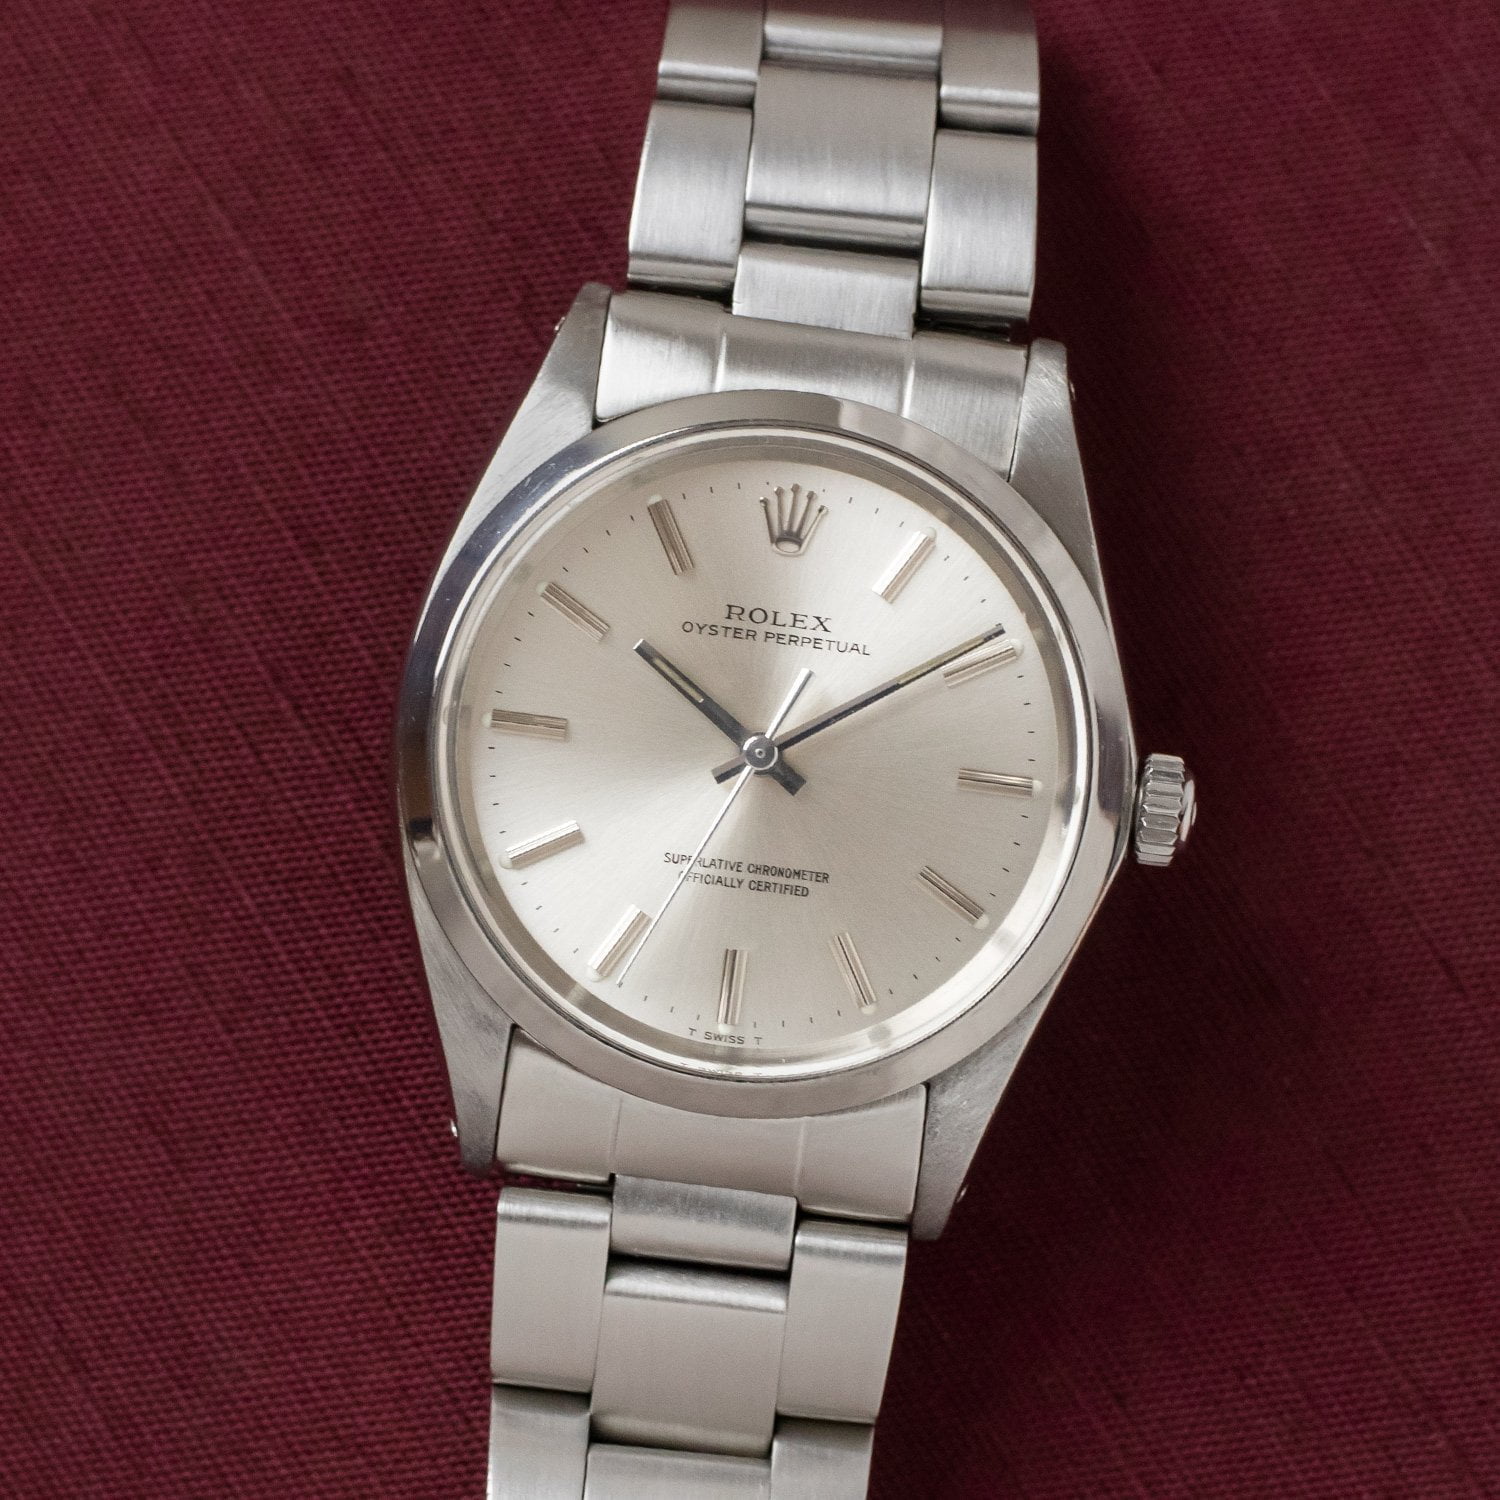 rolex 1018 for sale